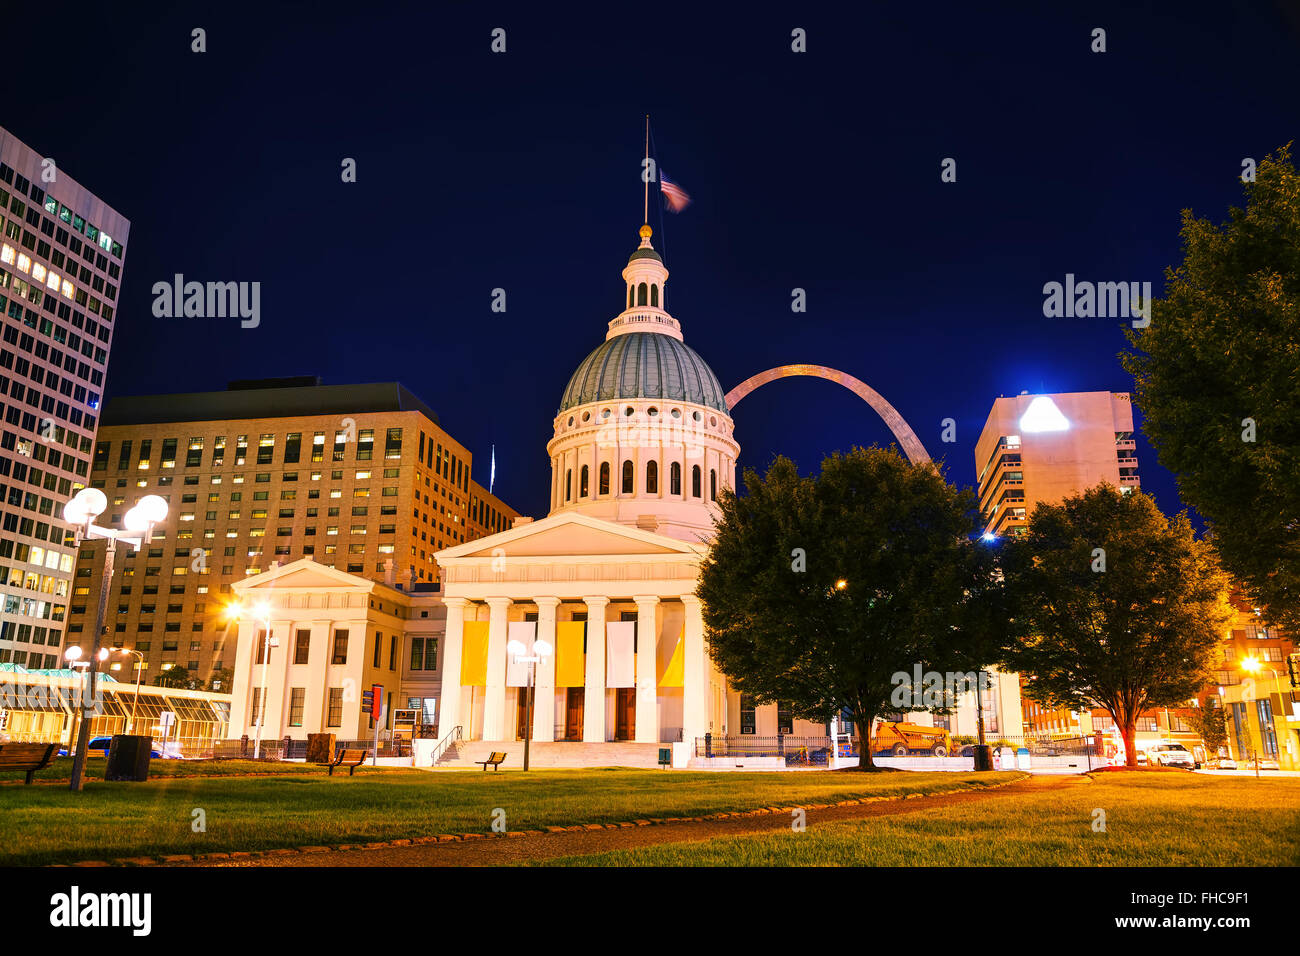 Downtown St Louis, MO with the Old Courthouse at night Stock Photo